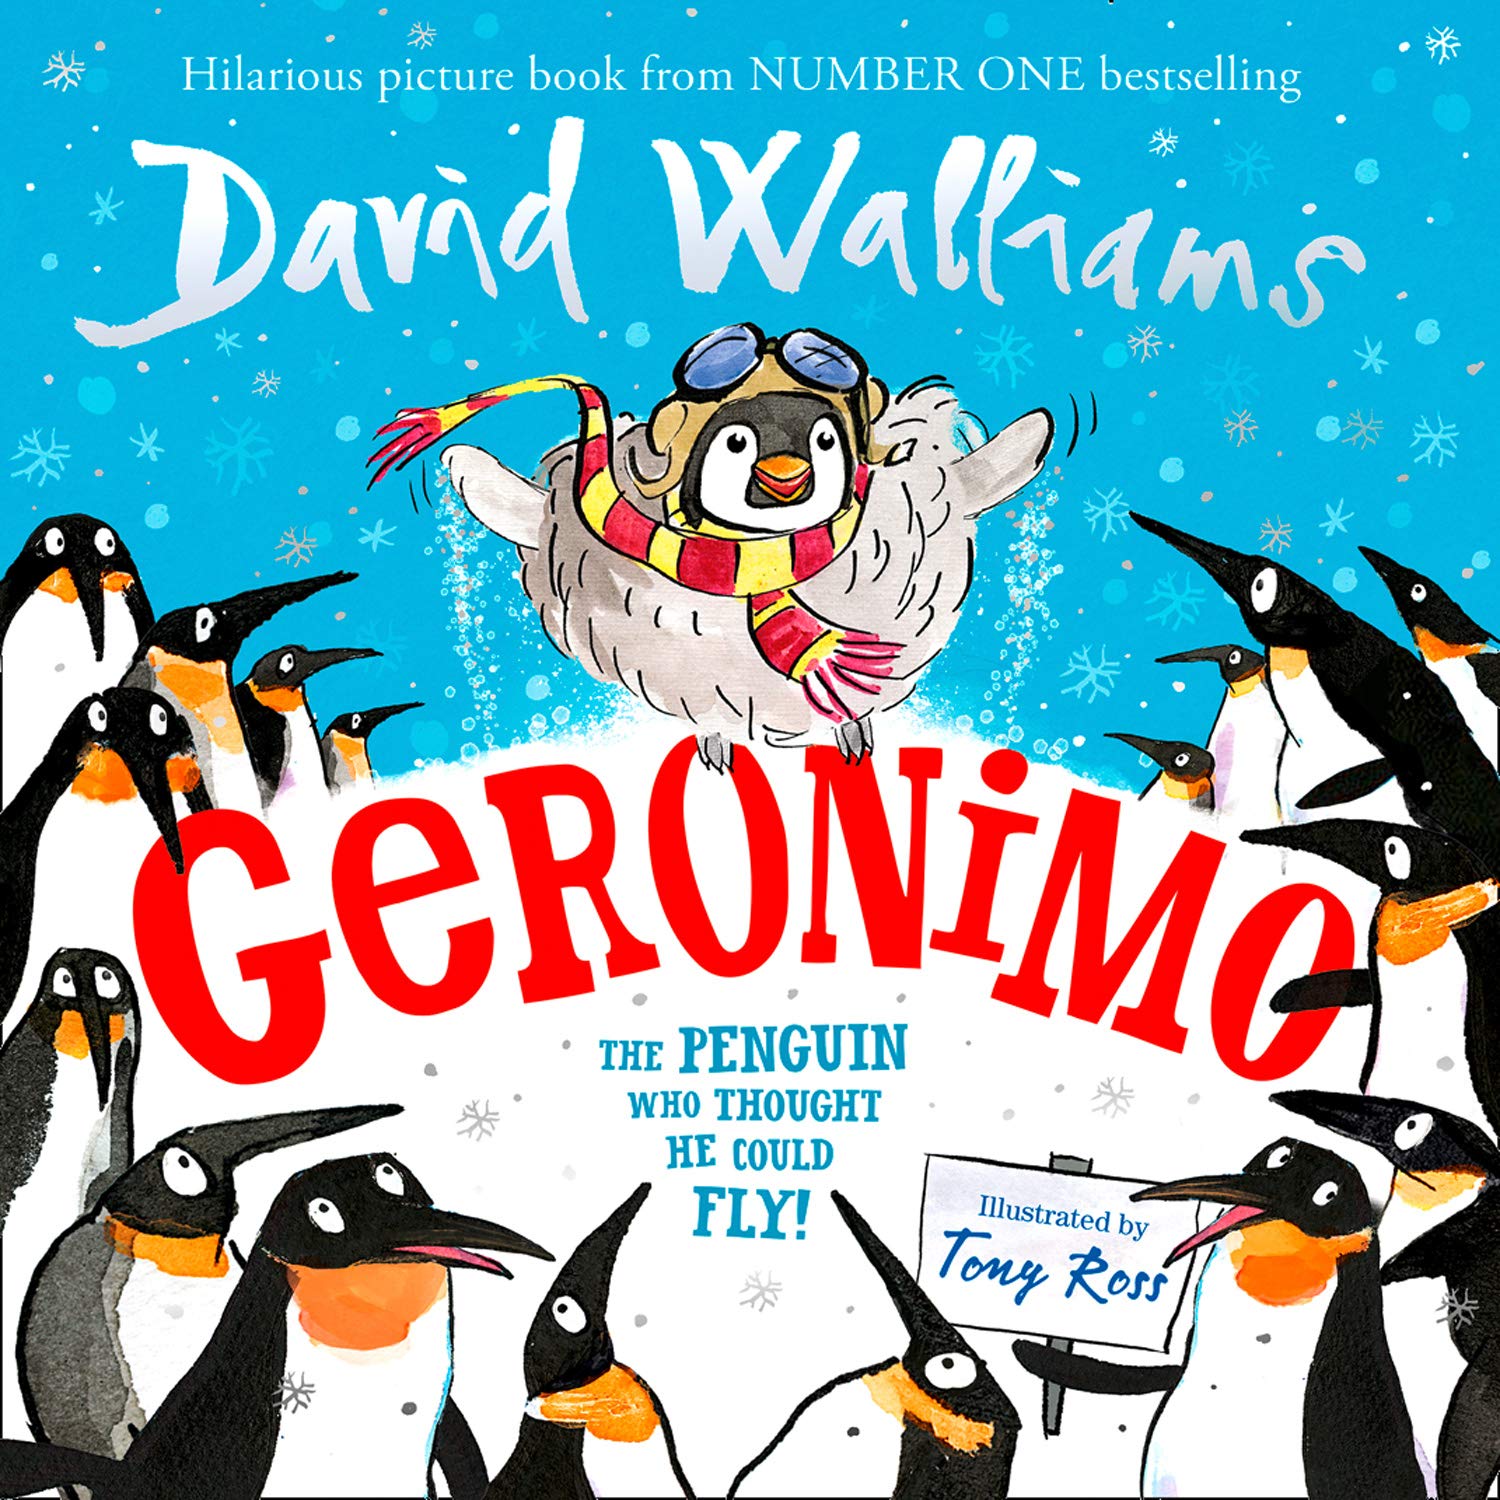 Geronimo: The Penguin who thought he could fly!